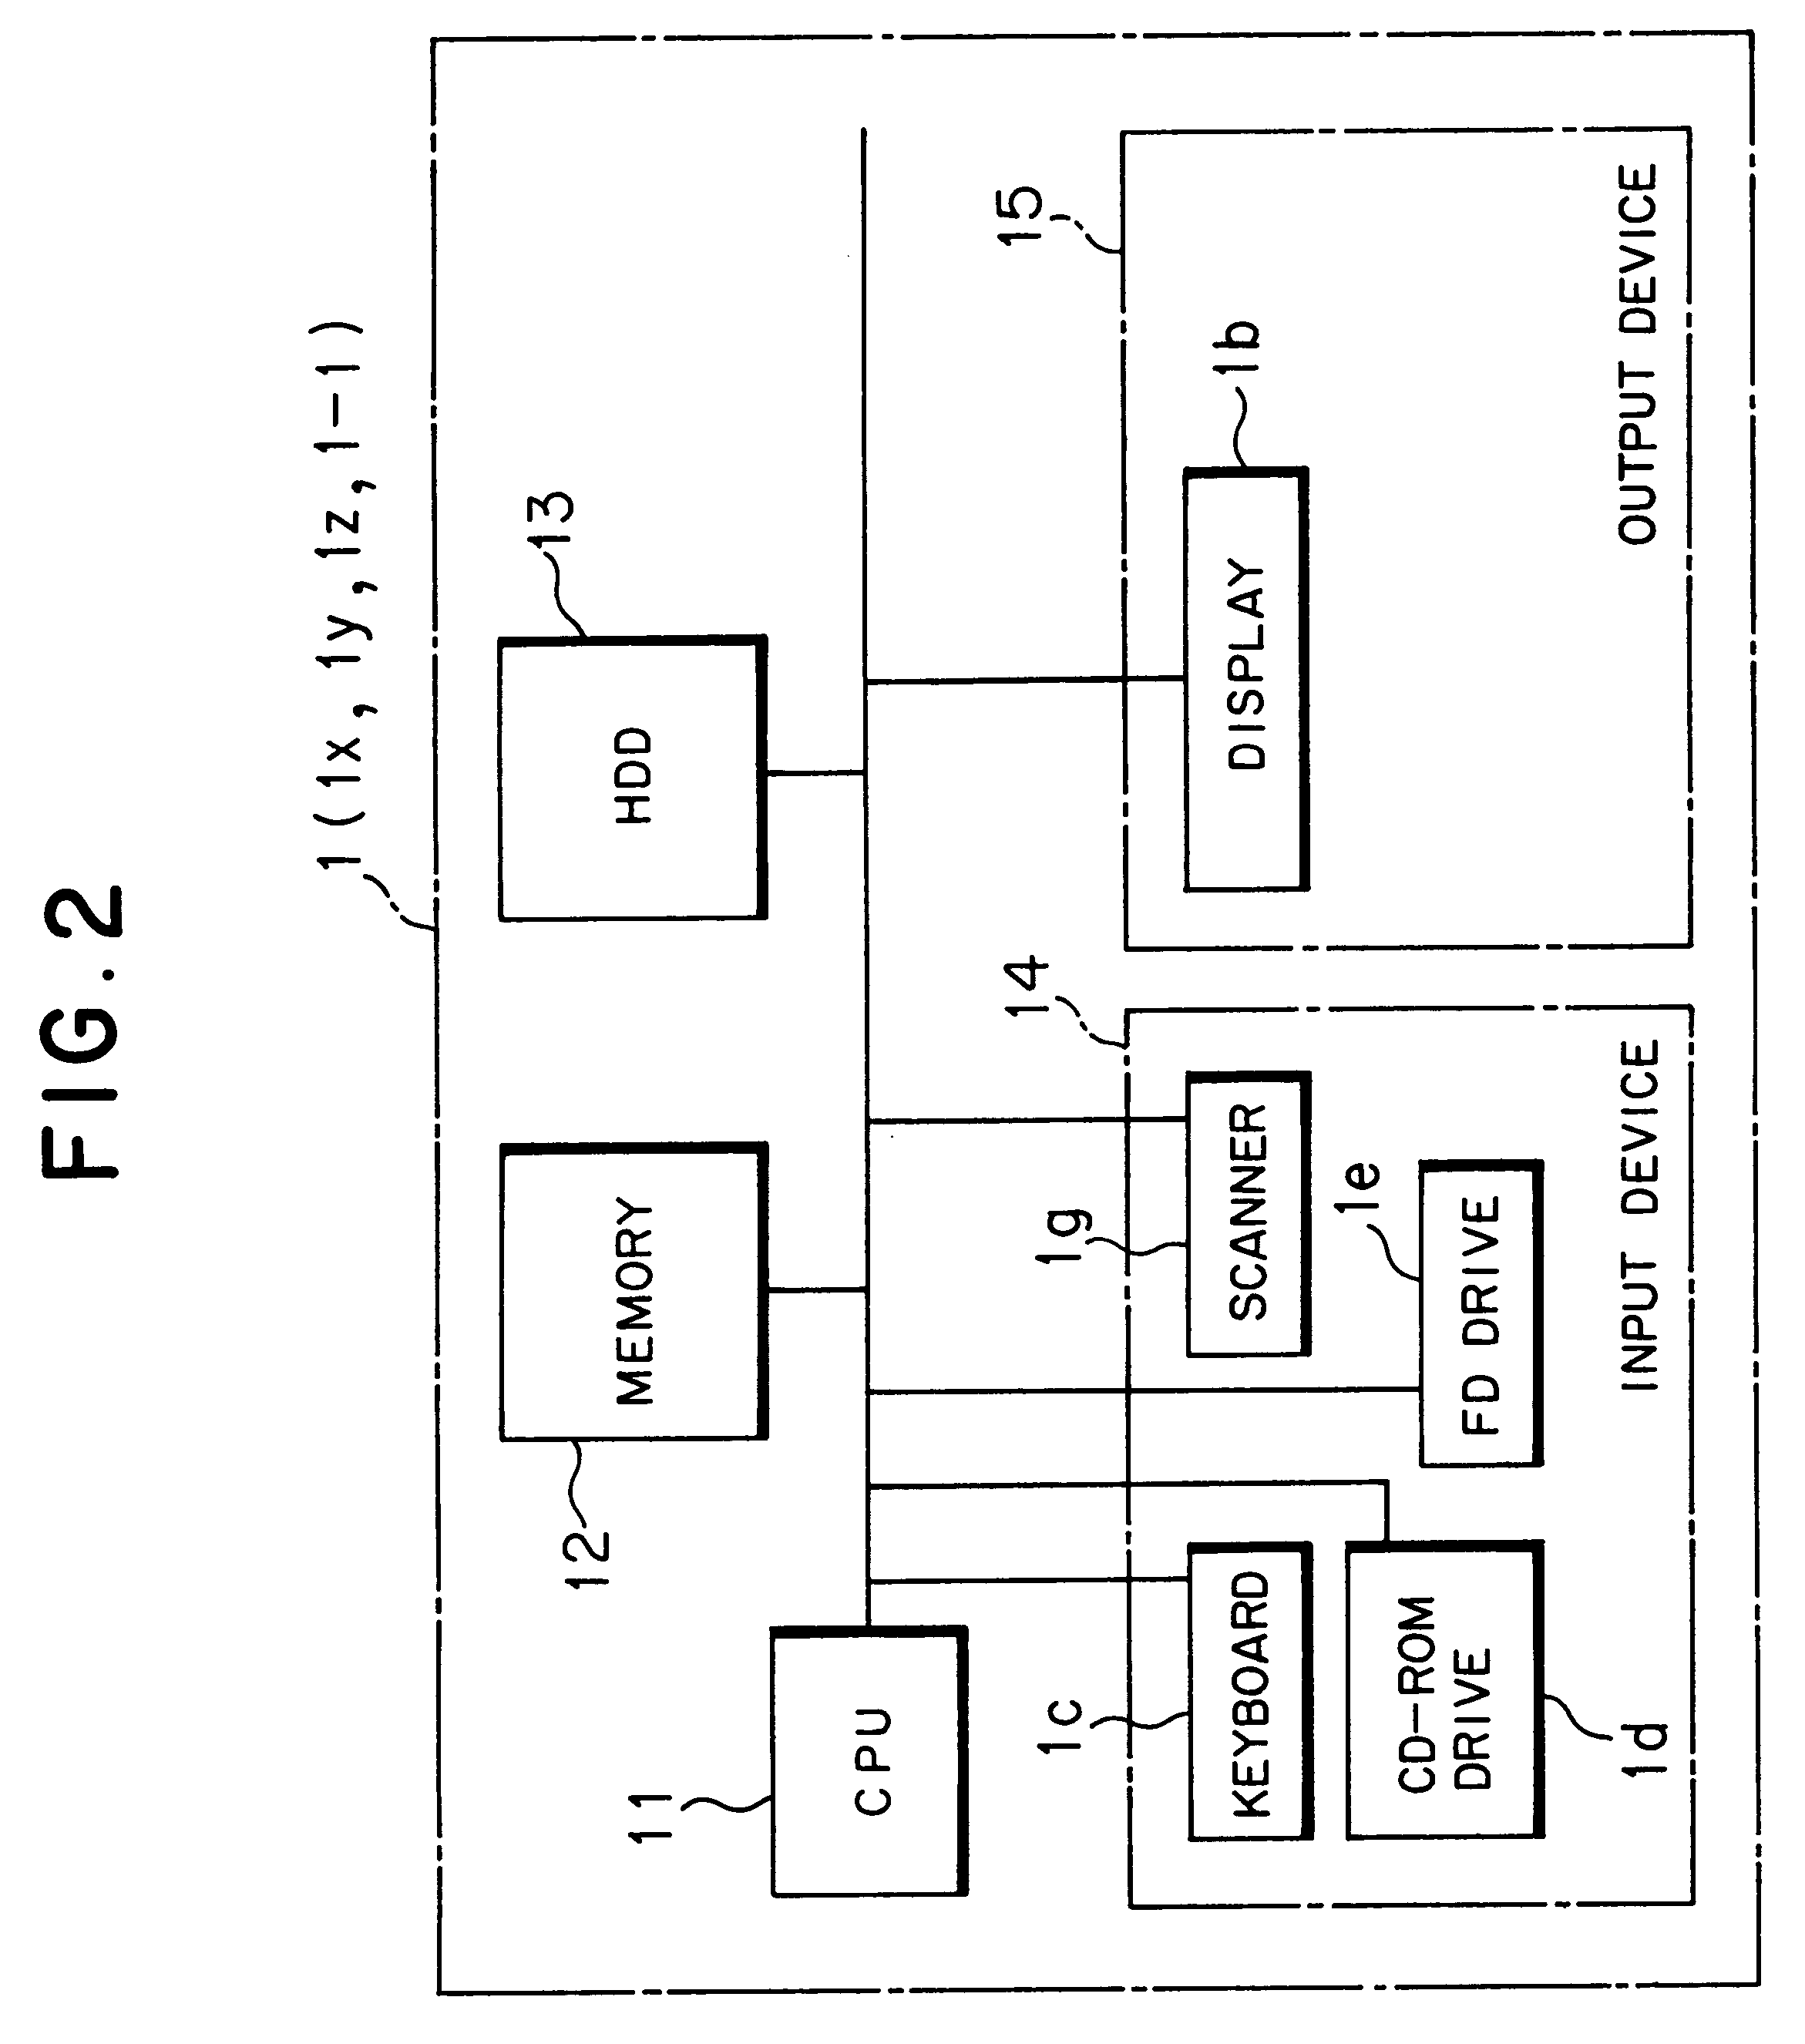 Related term extraction apparatus, related term extraction method, and a computer-readable recording medium having a related term extraction program recorded thereon